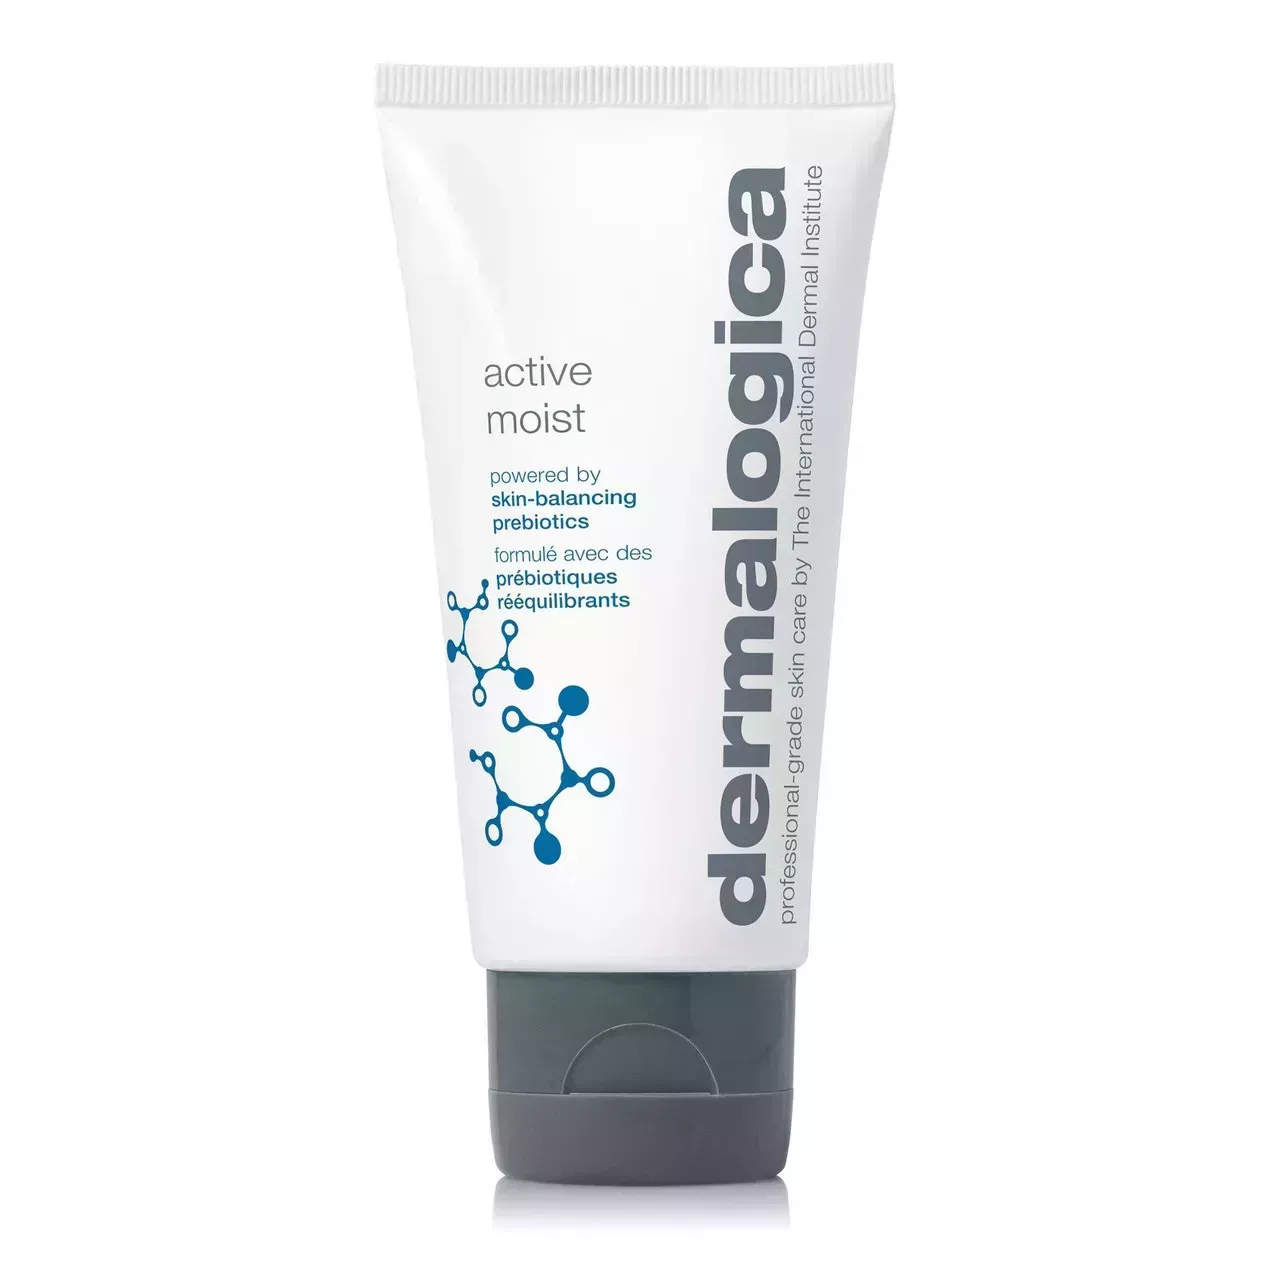 squeeze bottle of dermalogica active moist on a white background